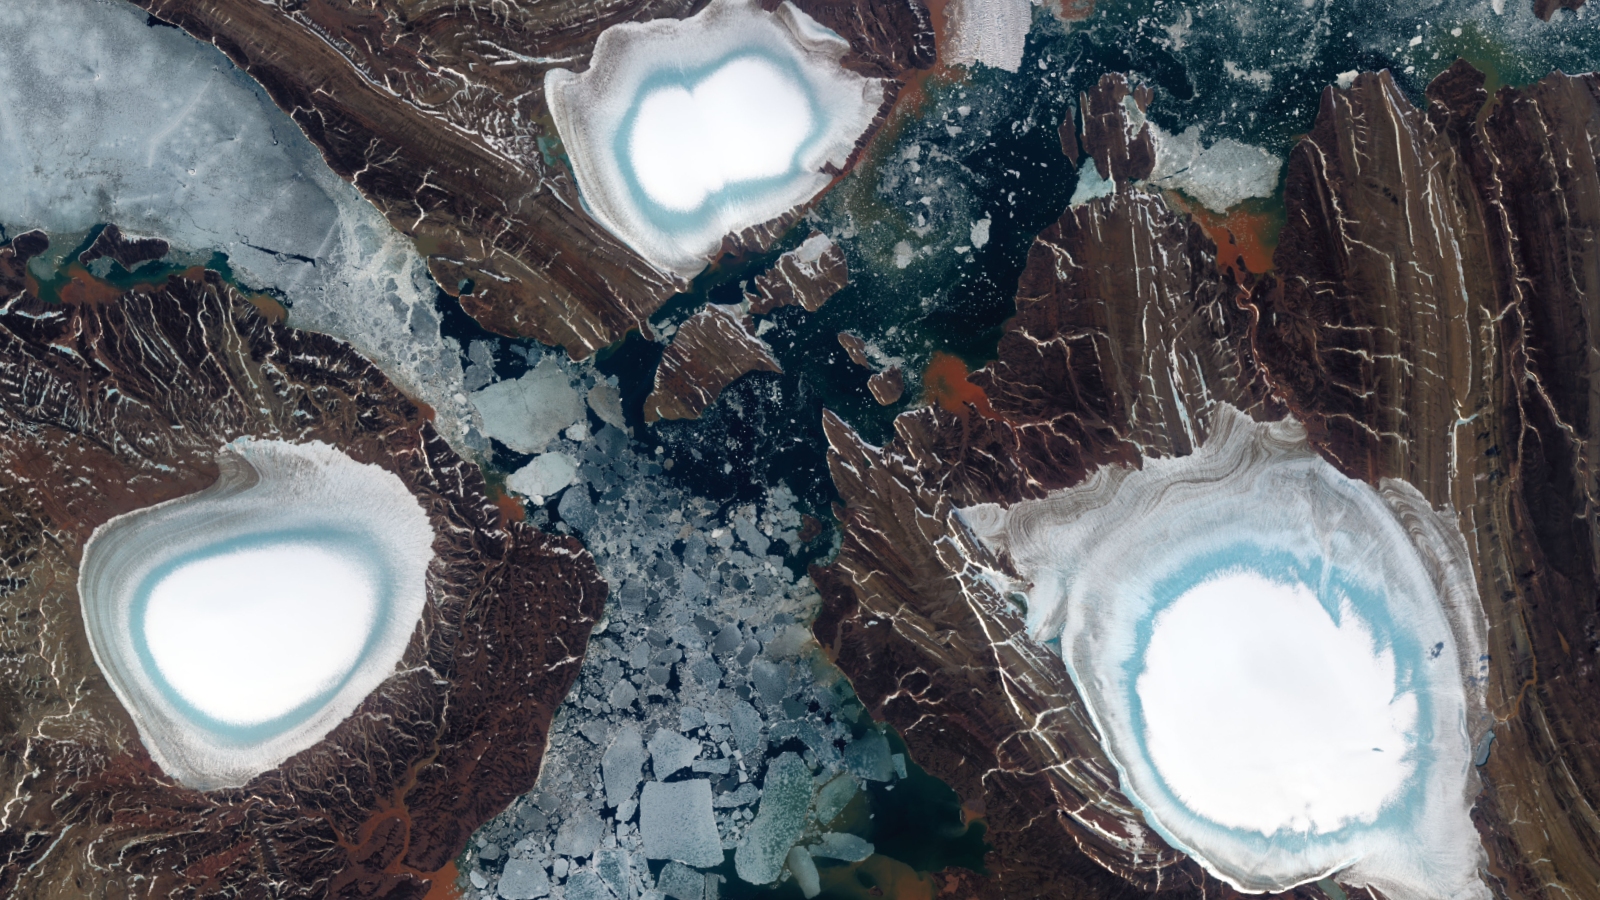  Earth from space: Trio of ringed ice caps look otherworldly on Russian Arctic islands 